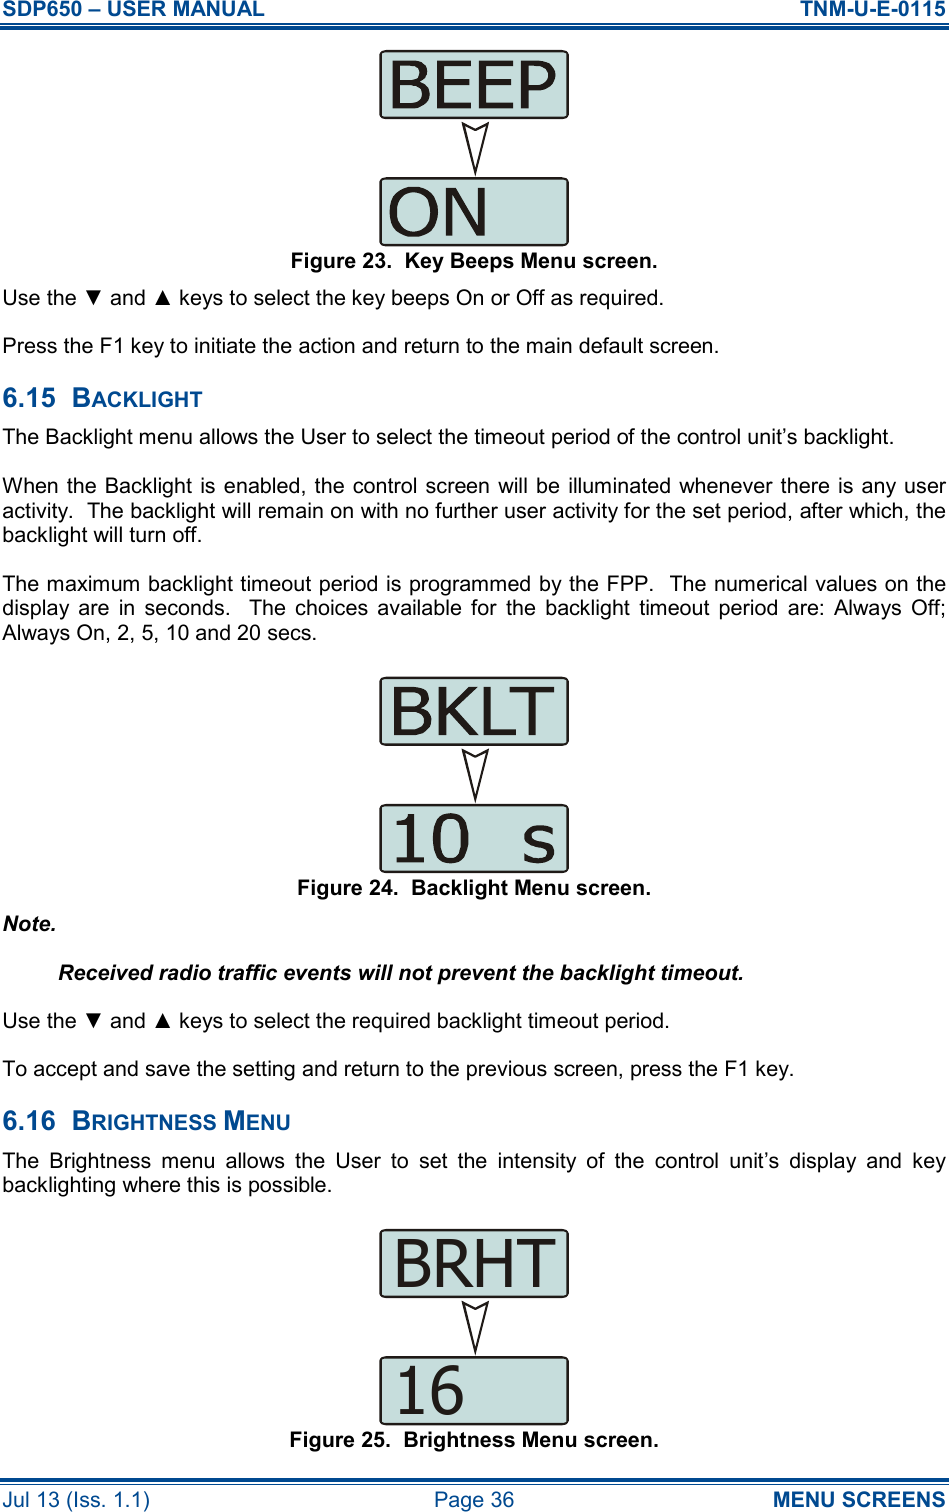 SDP650 – USER MANUAL  TNM-U-E-0115 Jul 13 (Iss. 1.1)  Page 36  MENU SCREENS Figure 23.  Key Beeps Menu screen. Use the ▼ and ▲ keys to select the key beeps On or Off as required. Press the F1 key to initiate the action and return to the main default screen. 6.15  BACKLIGHT The Backlight menu allows the User to select the timeout period of the control unit’s backlight. When the Backlight is enabled, the control screen will be illuminated whenever there is any user activity.  The backlight will remain on with no further user activity for the set period, after which, the backlight will turn off. The maximum backlight timeout period is programmed by the FPP.  The numerical values on the display  are  in  seconds.    The  choices  available  for  the  backlight  timeout  period  are:  Always  Off; Always On, 2, 5, 10 and 20 secs. Figure 24.  Backlight Menu screen. Note. Received radio traffic events will not prevent the backlight timeout. Use the ▼ and ▲ keys to select the required backlight timeout period. To accept and save the setting and return to the previous screen, press the F1 key. 6.16  BRIGHTNESS MENU The  Brightness  menu  allows  the  User  to  set  the  intensity  of  the  control  unit’s  display  and  key backlighting where this is possible. Figure 25.  Brightness Menu screen. 16BRHT